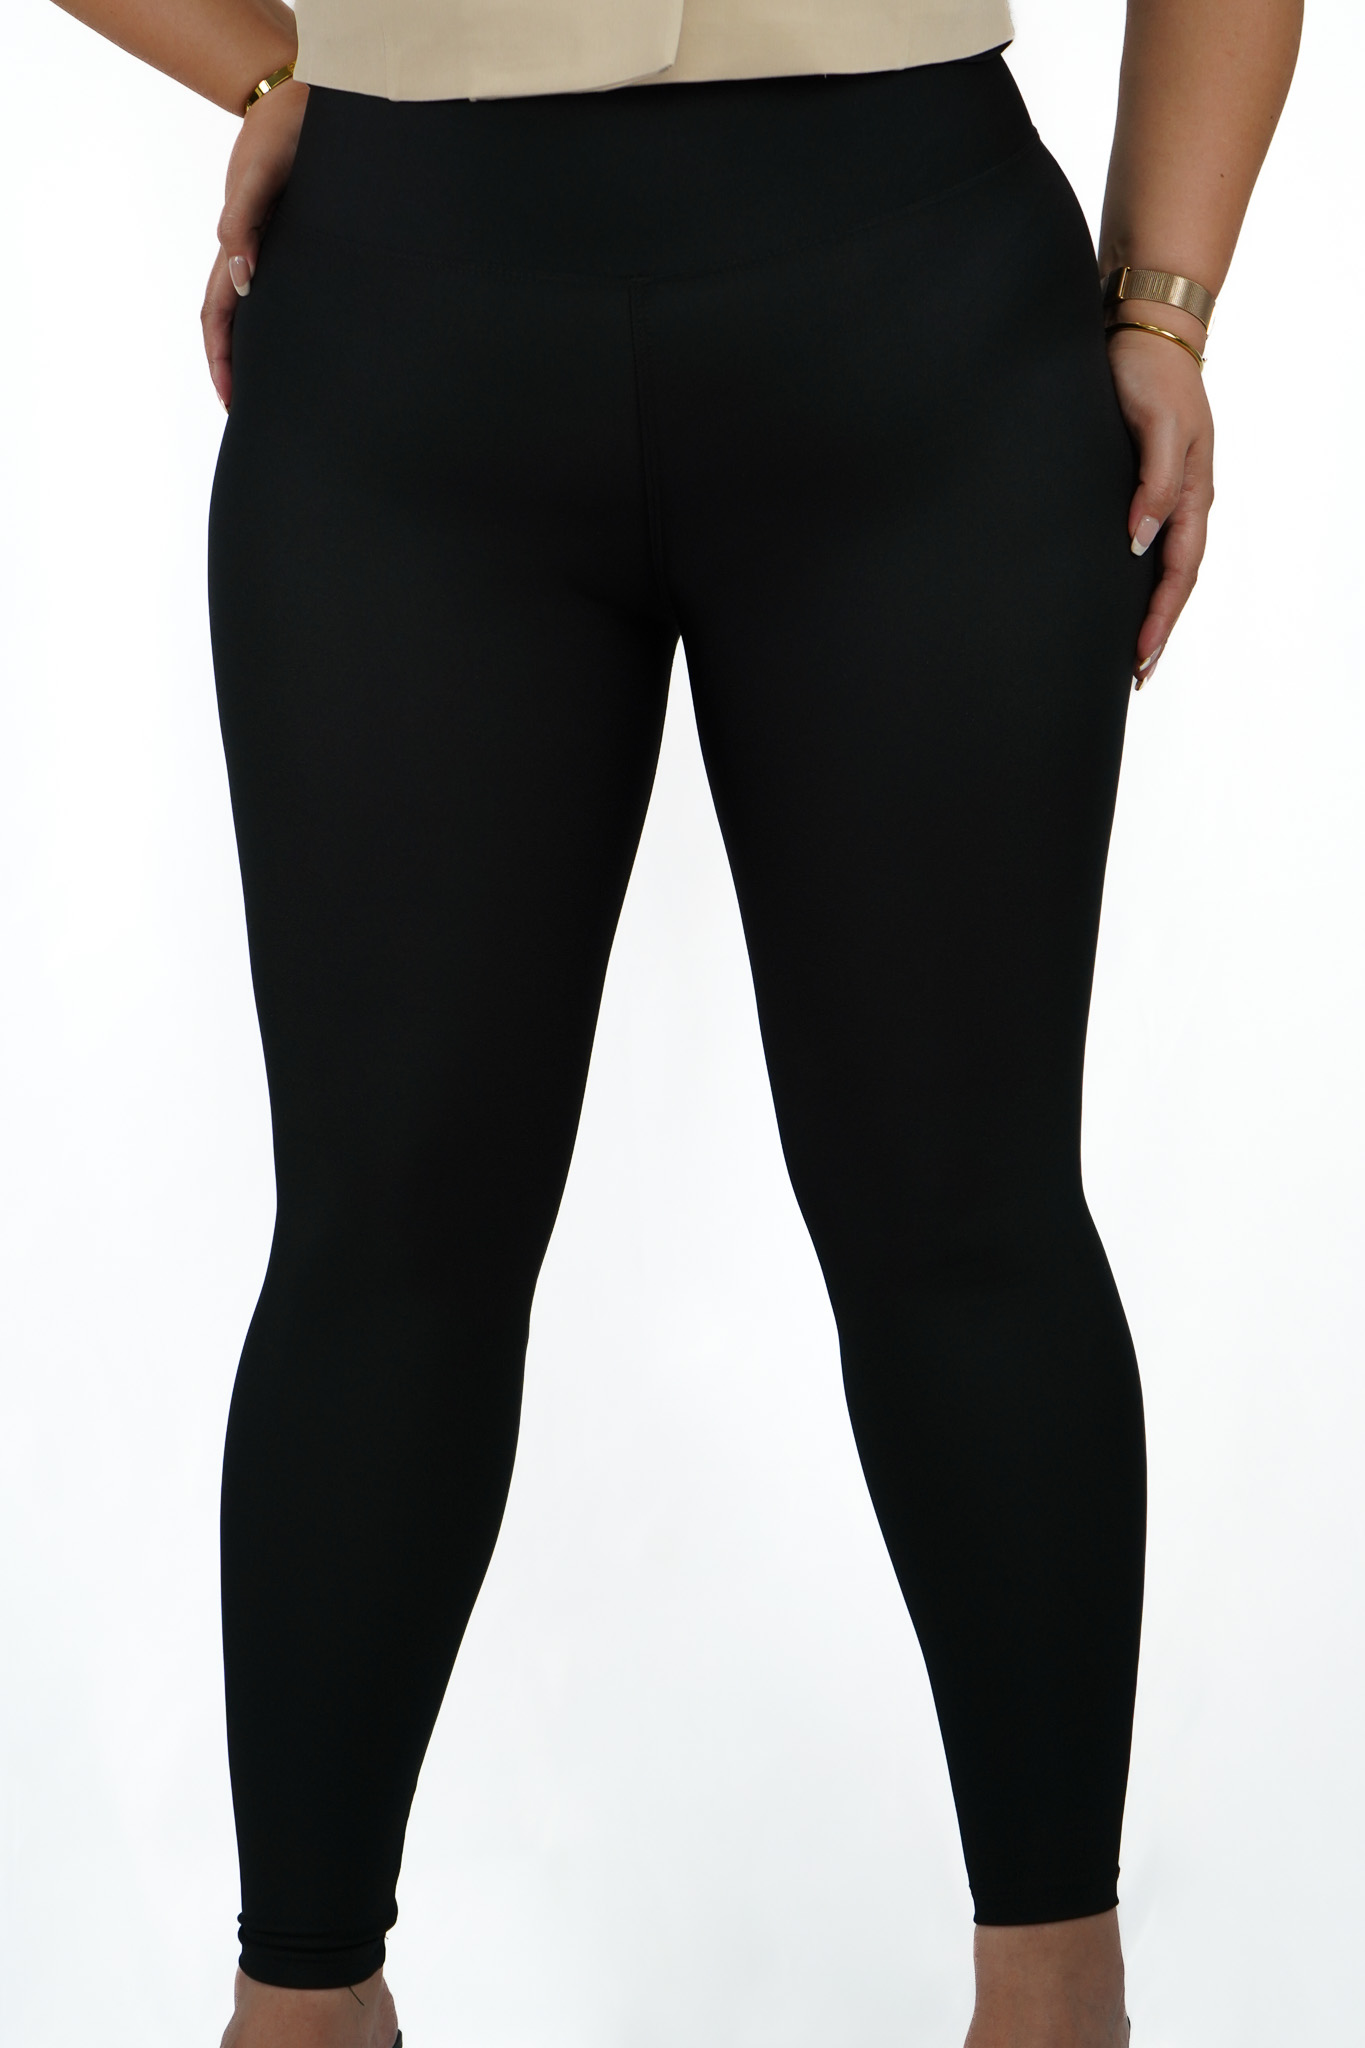 Pink Lycra Push Up Cross Waist Leggings With Cross Band For Women High  Waist Workout Pants, Stretchy And Fashionable Plus Size Available H1221  From Mengyang10, $11.96 | DHgate.Com